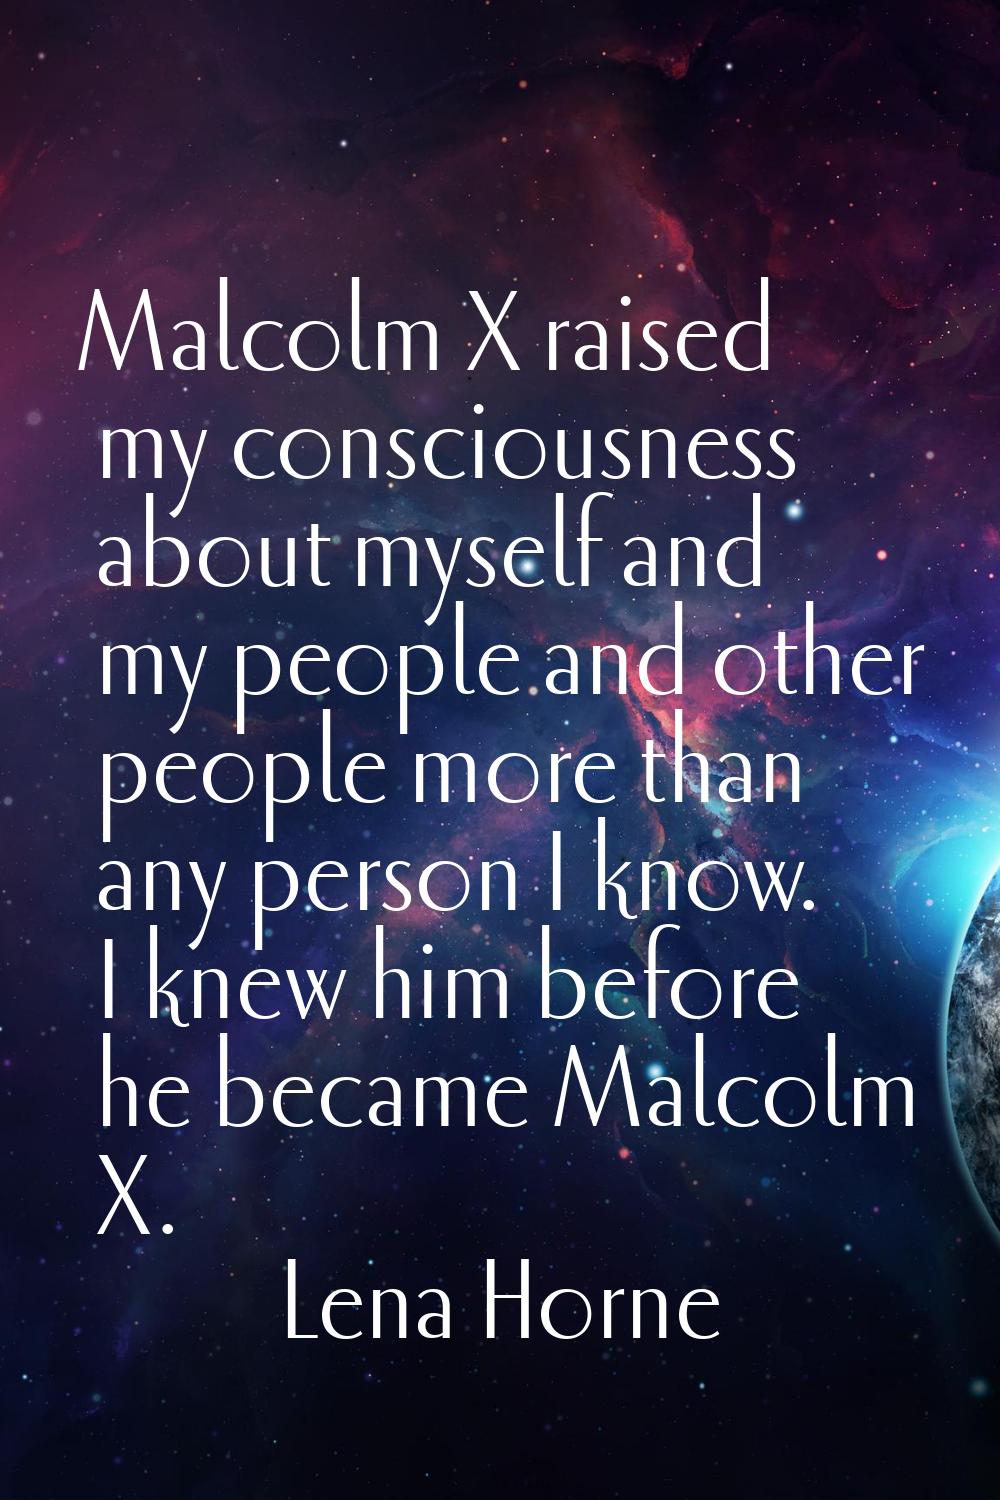 Malcolm X raised my consciousness about myself and my people and other people more than any person 